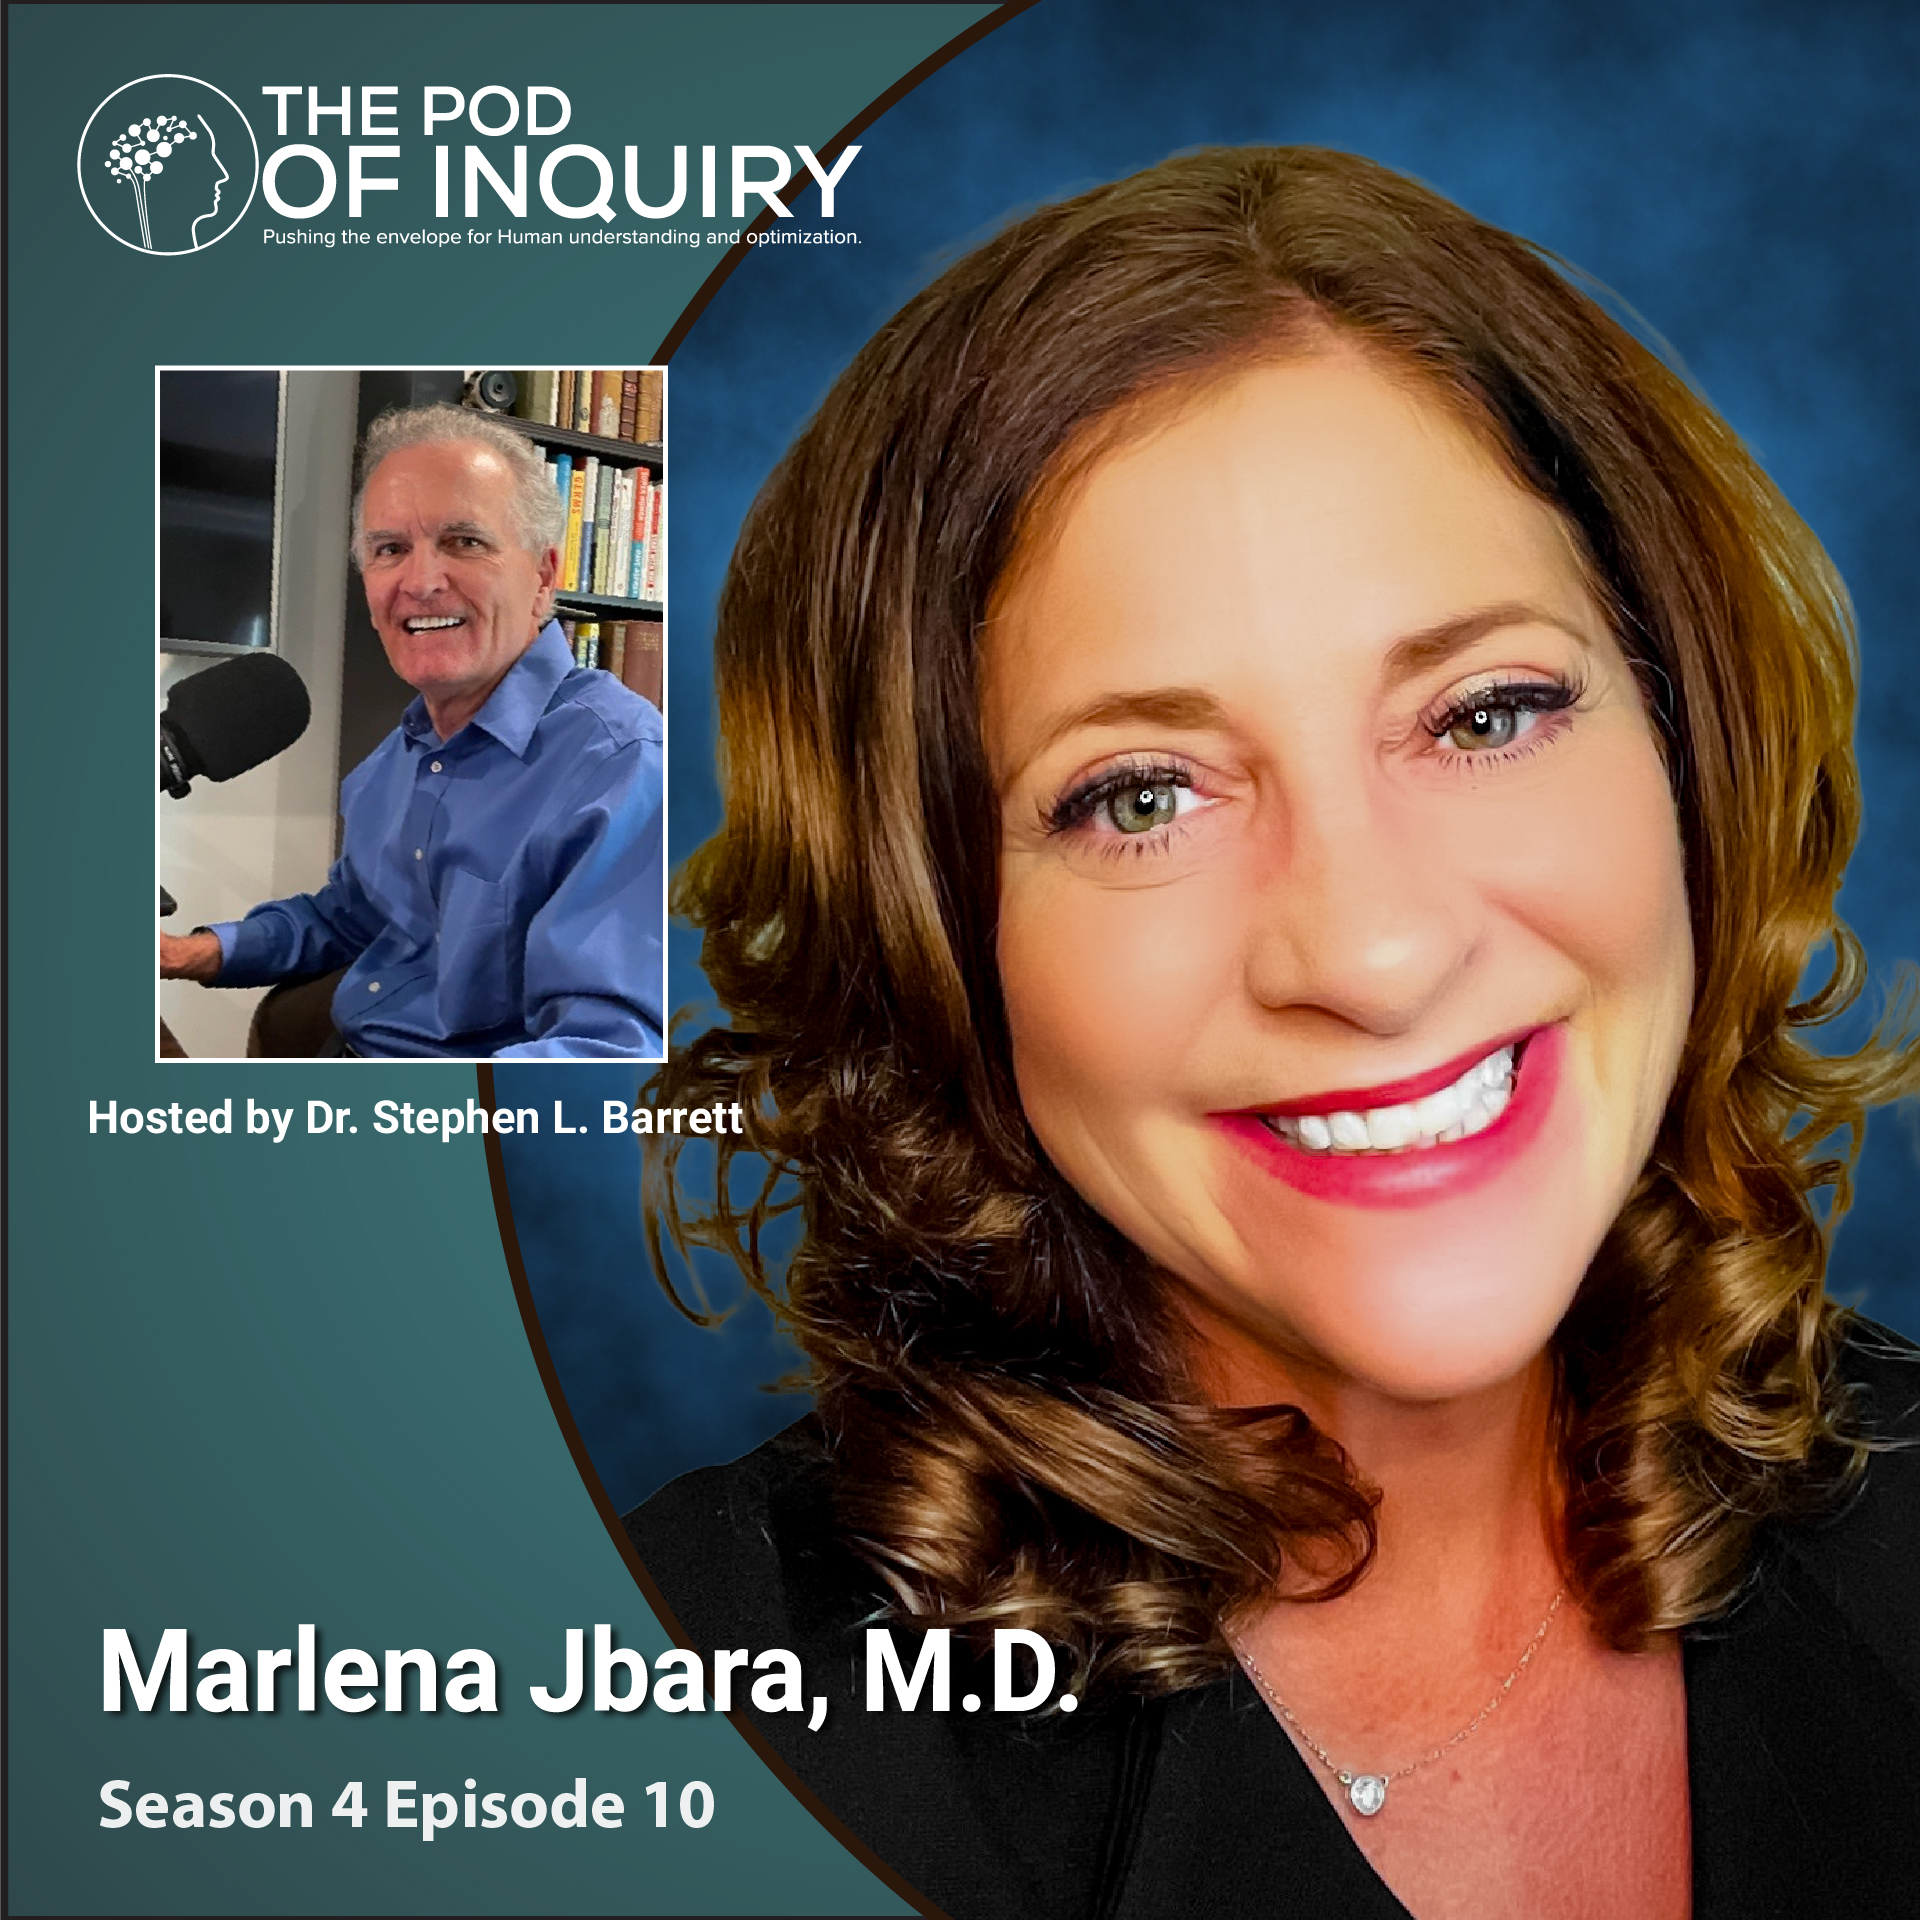 Demystifying Lower Extremity X-rays with an Interventional Radiologist Marlena Jbara, M.D.!